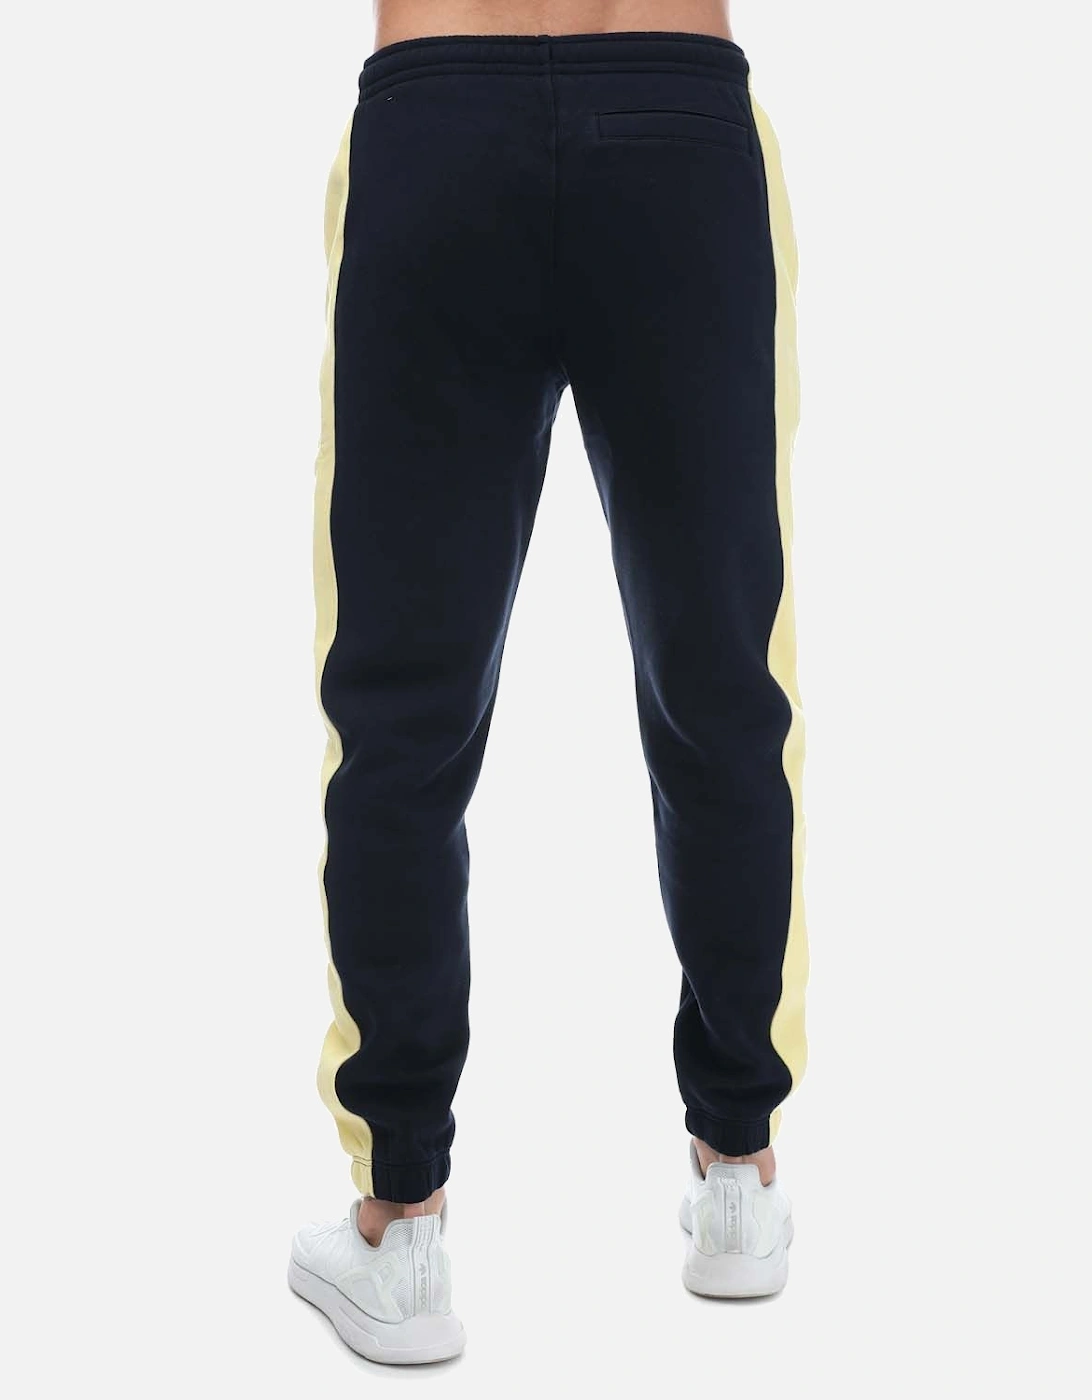 Mens Graphic Track Pants